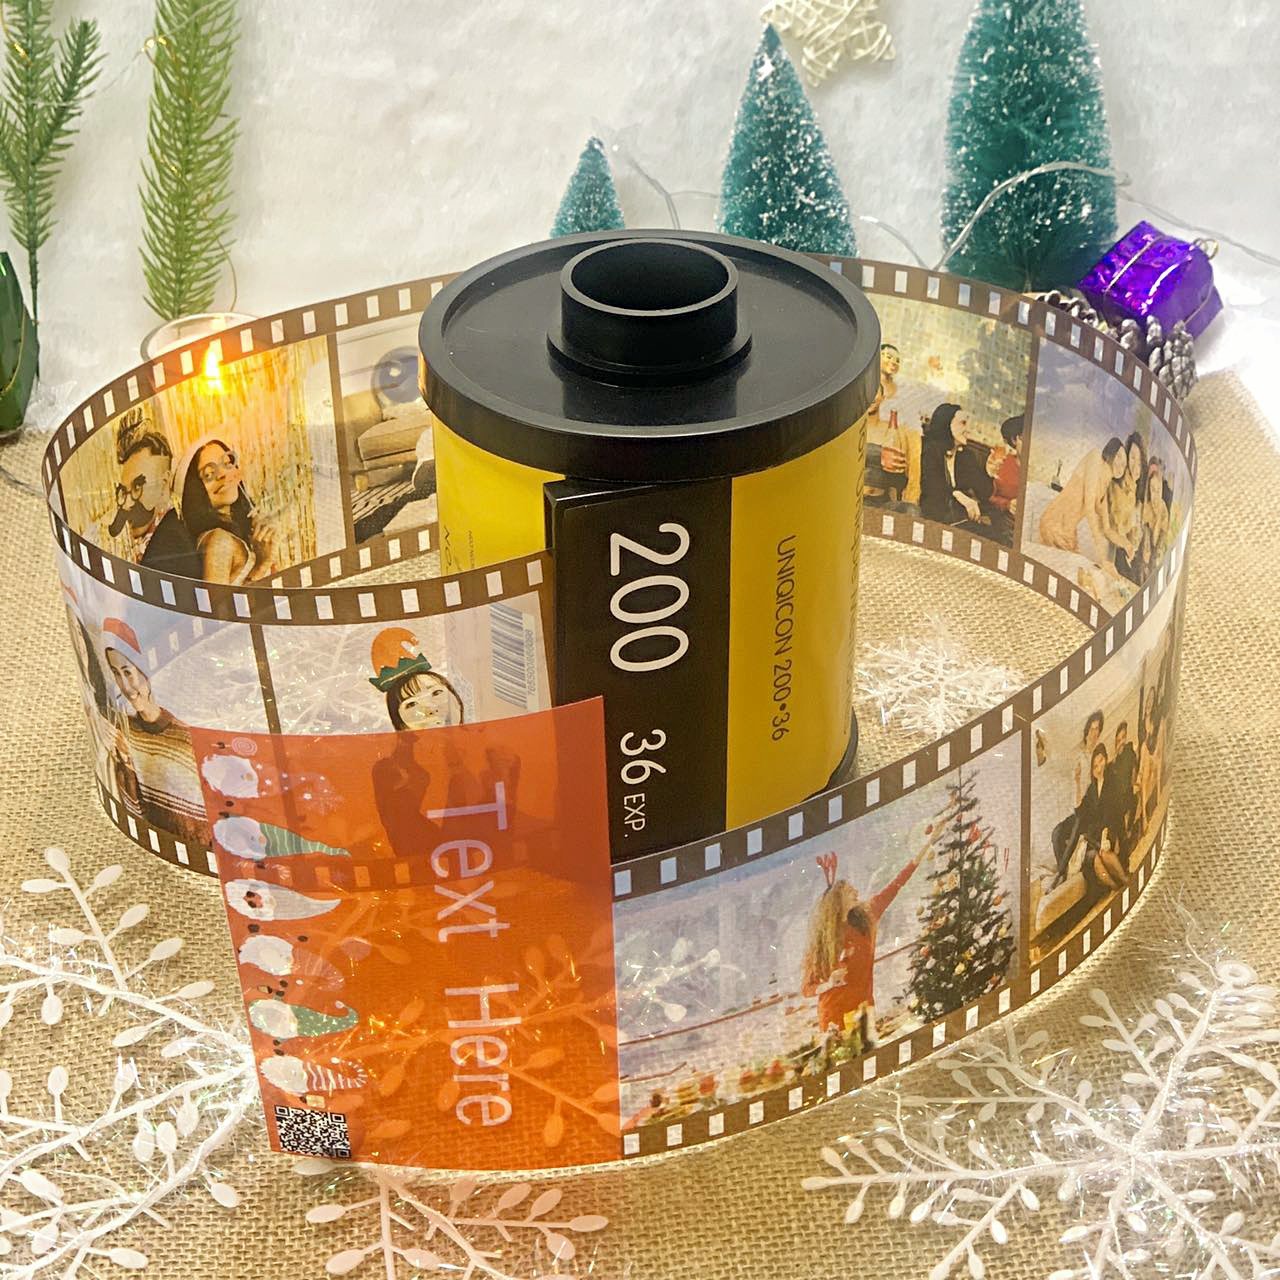 2023 XL Film Camera Roll Photo Picture Keychain Customized Gifts, Extra Large Custom Keychains , Custom Photo Key Chains, Personalized Gift for Men Boyfriend Best Friend Women Couple Christmas Gift - uniqicon